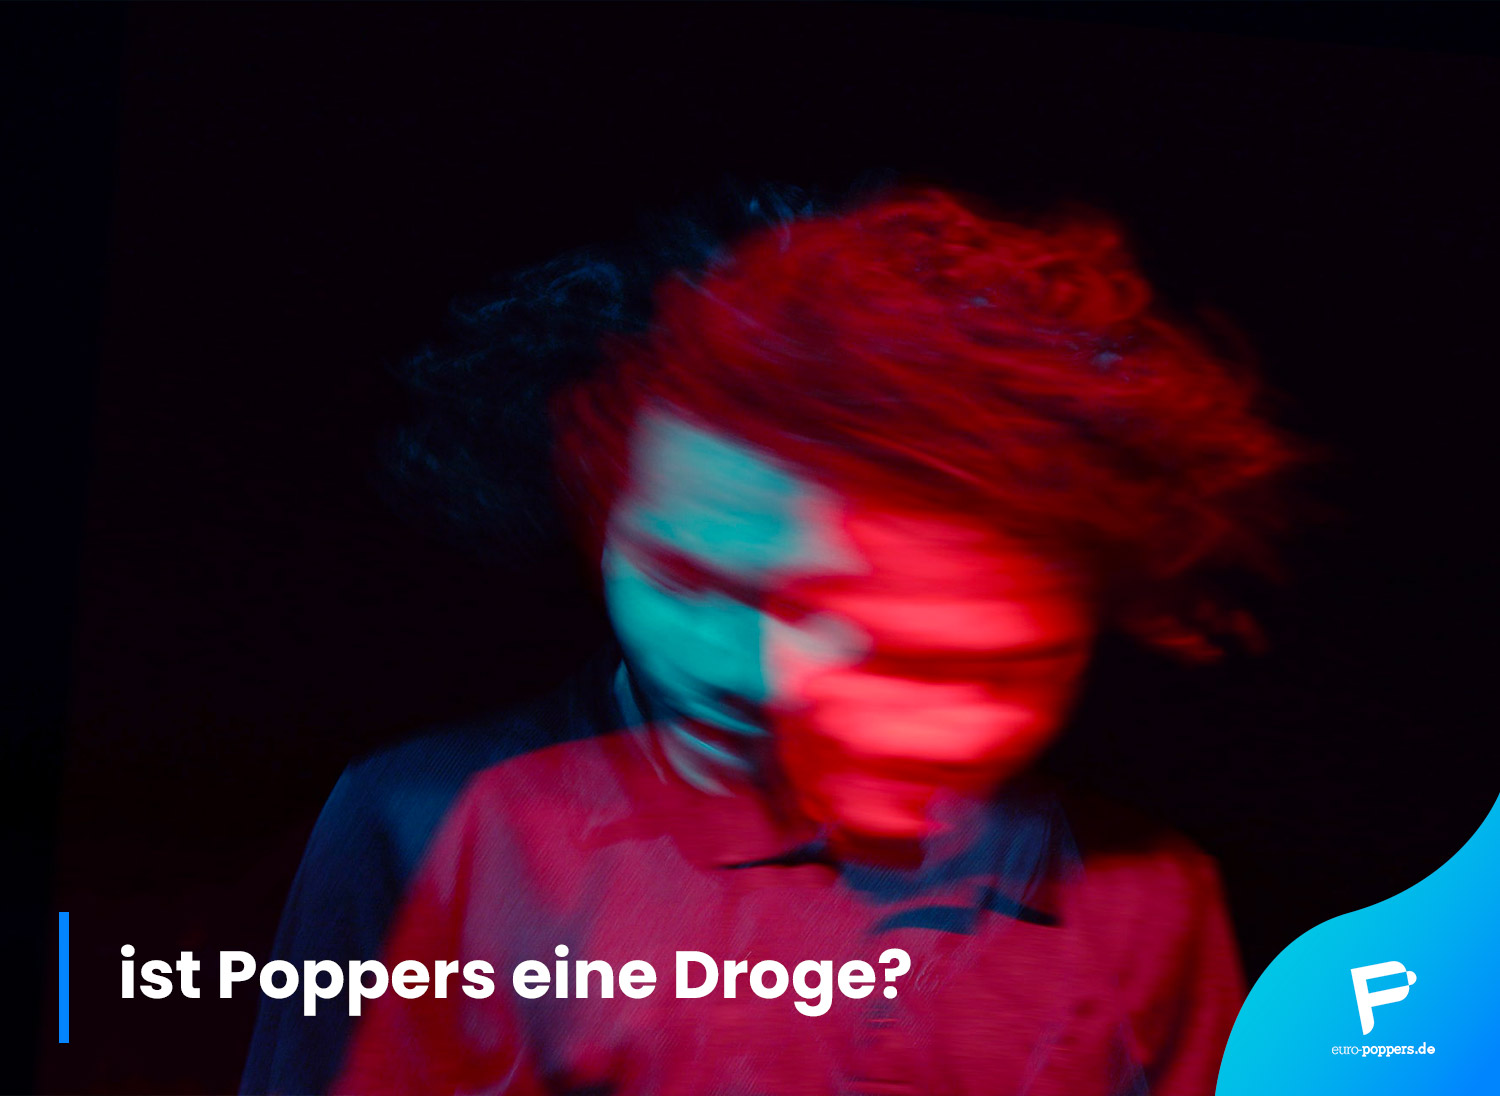 You are currently viewing Poppers Droge – ist Poppers eine Droge?